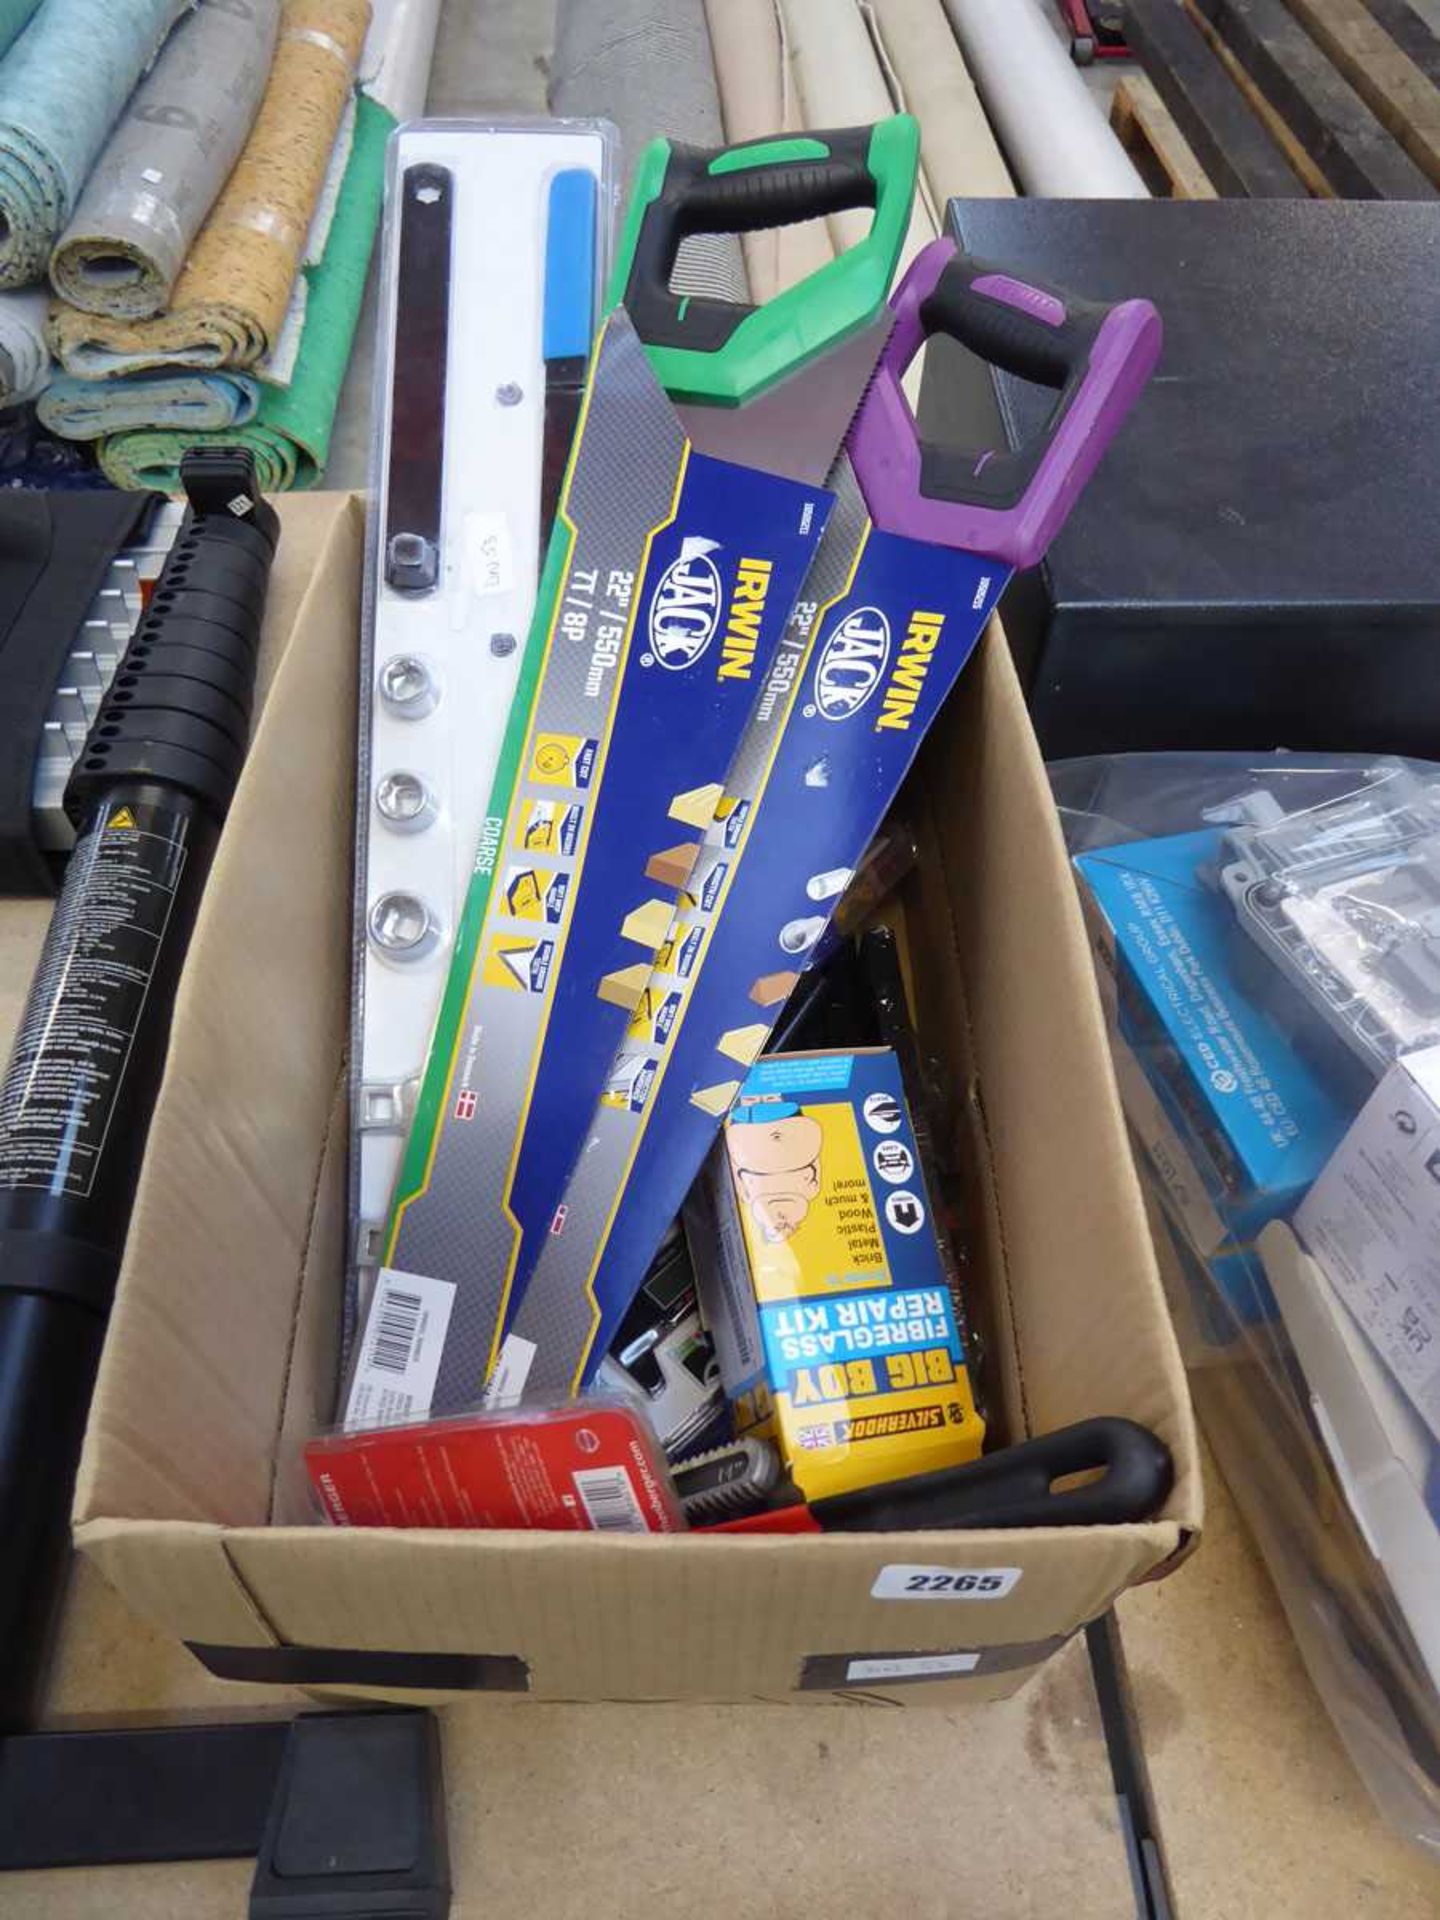 Crate of mixed tooling incl. saws, tape measures, etc.